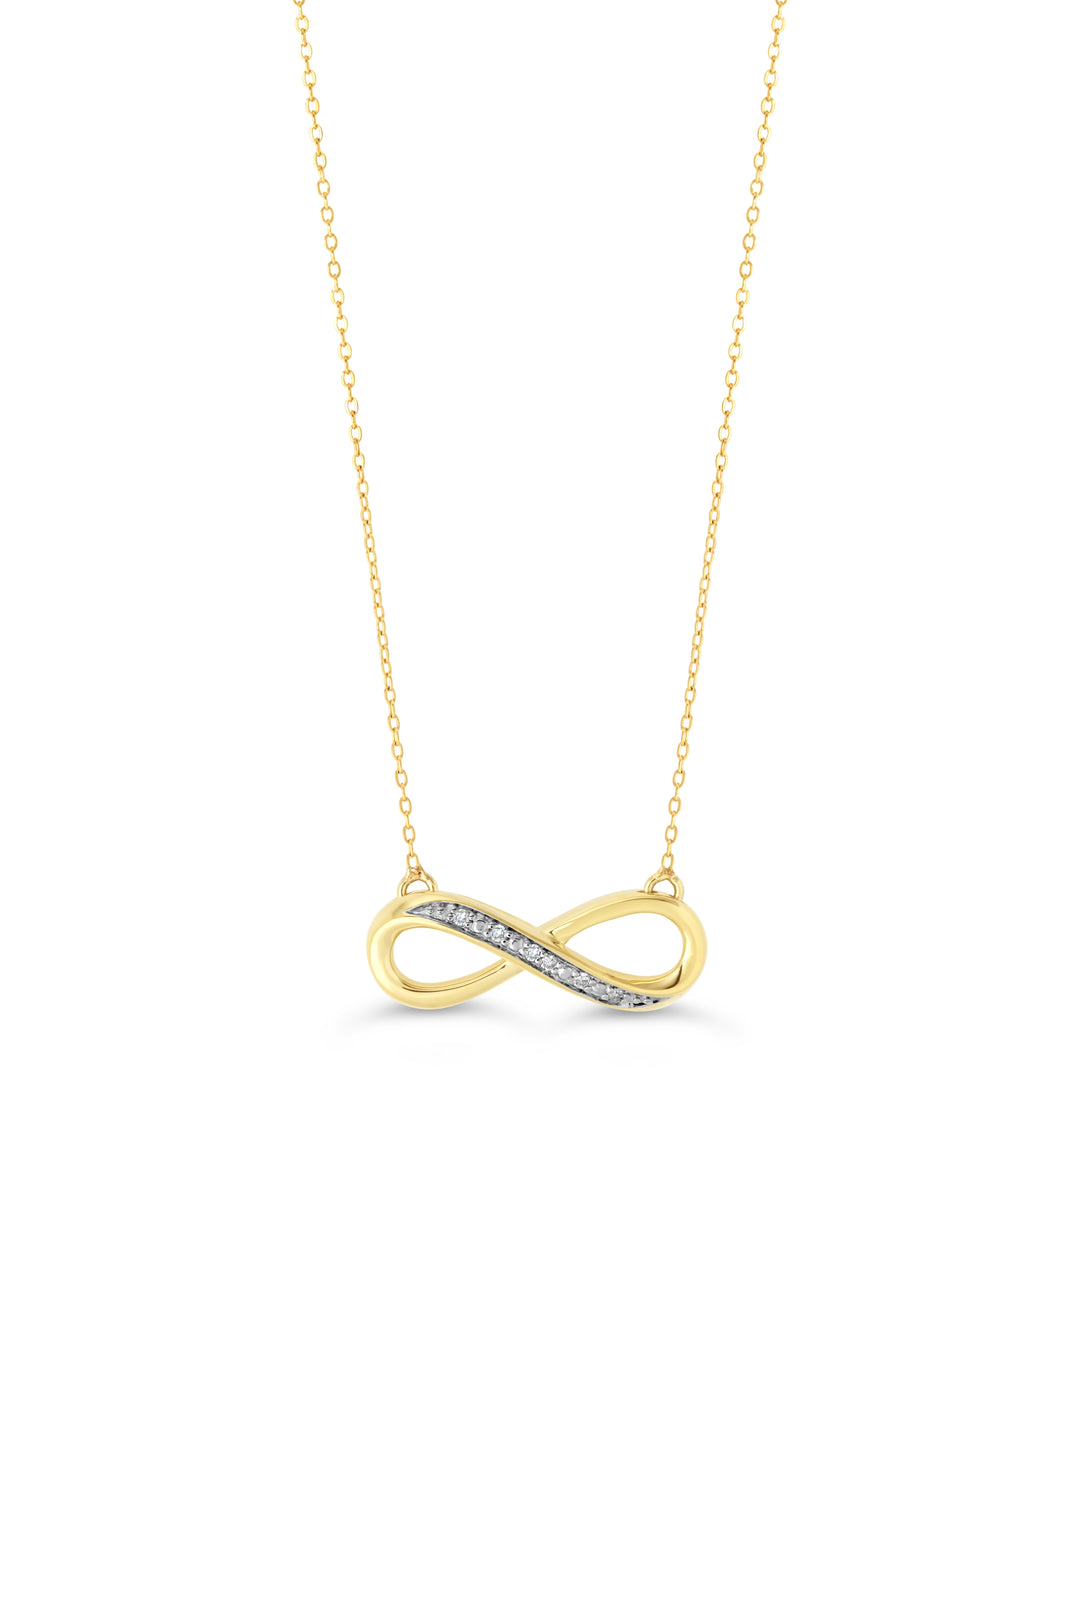 Women's 10K Yellow Gold 0.02 CTW Diamond Set Infinity Necklace With 16 Inch Chain